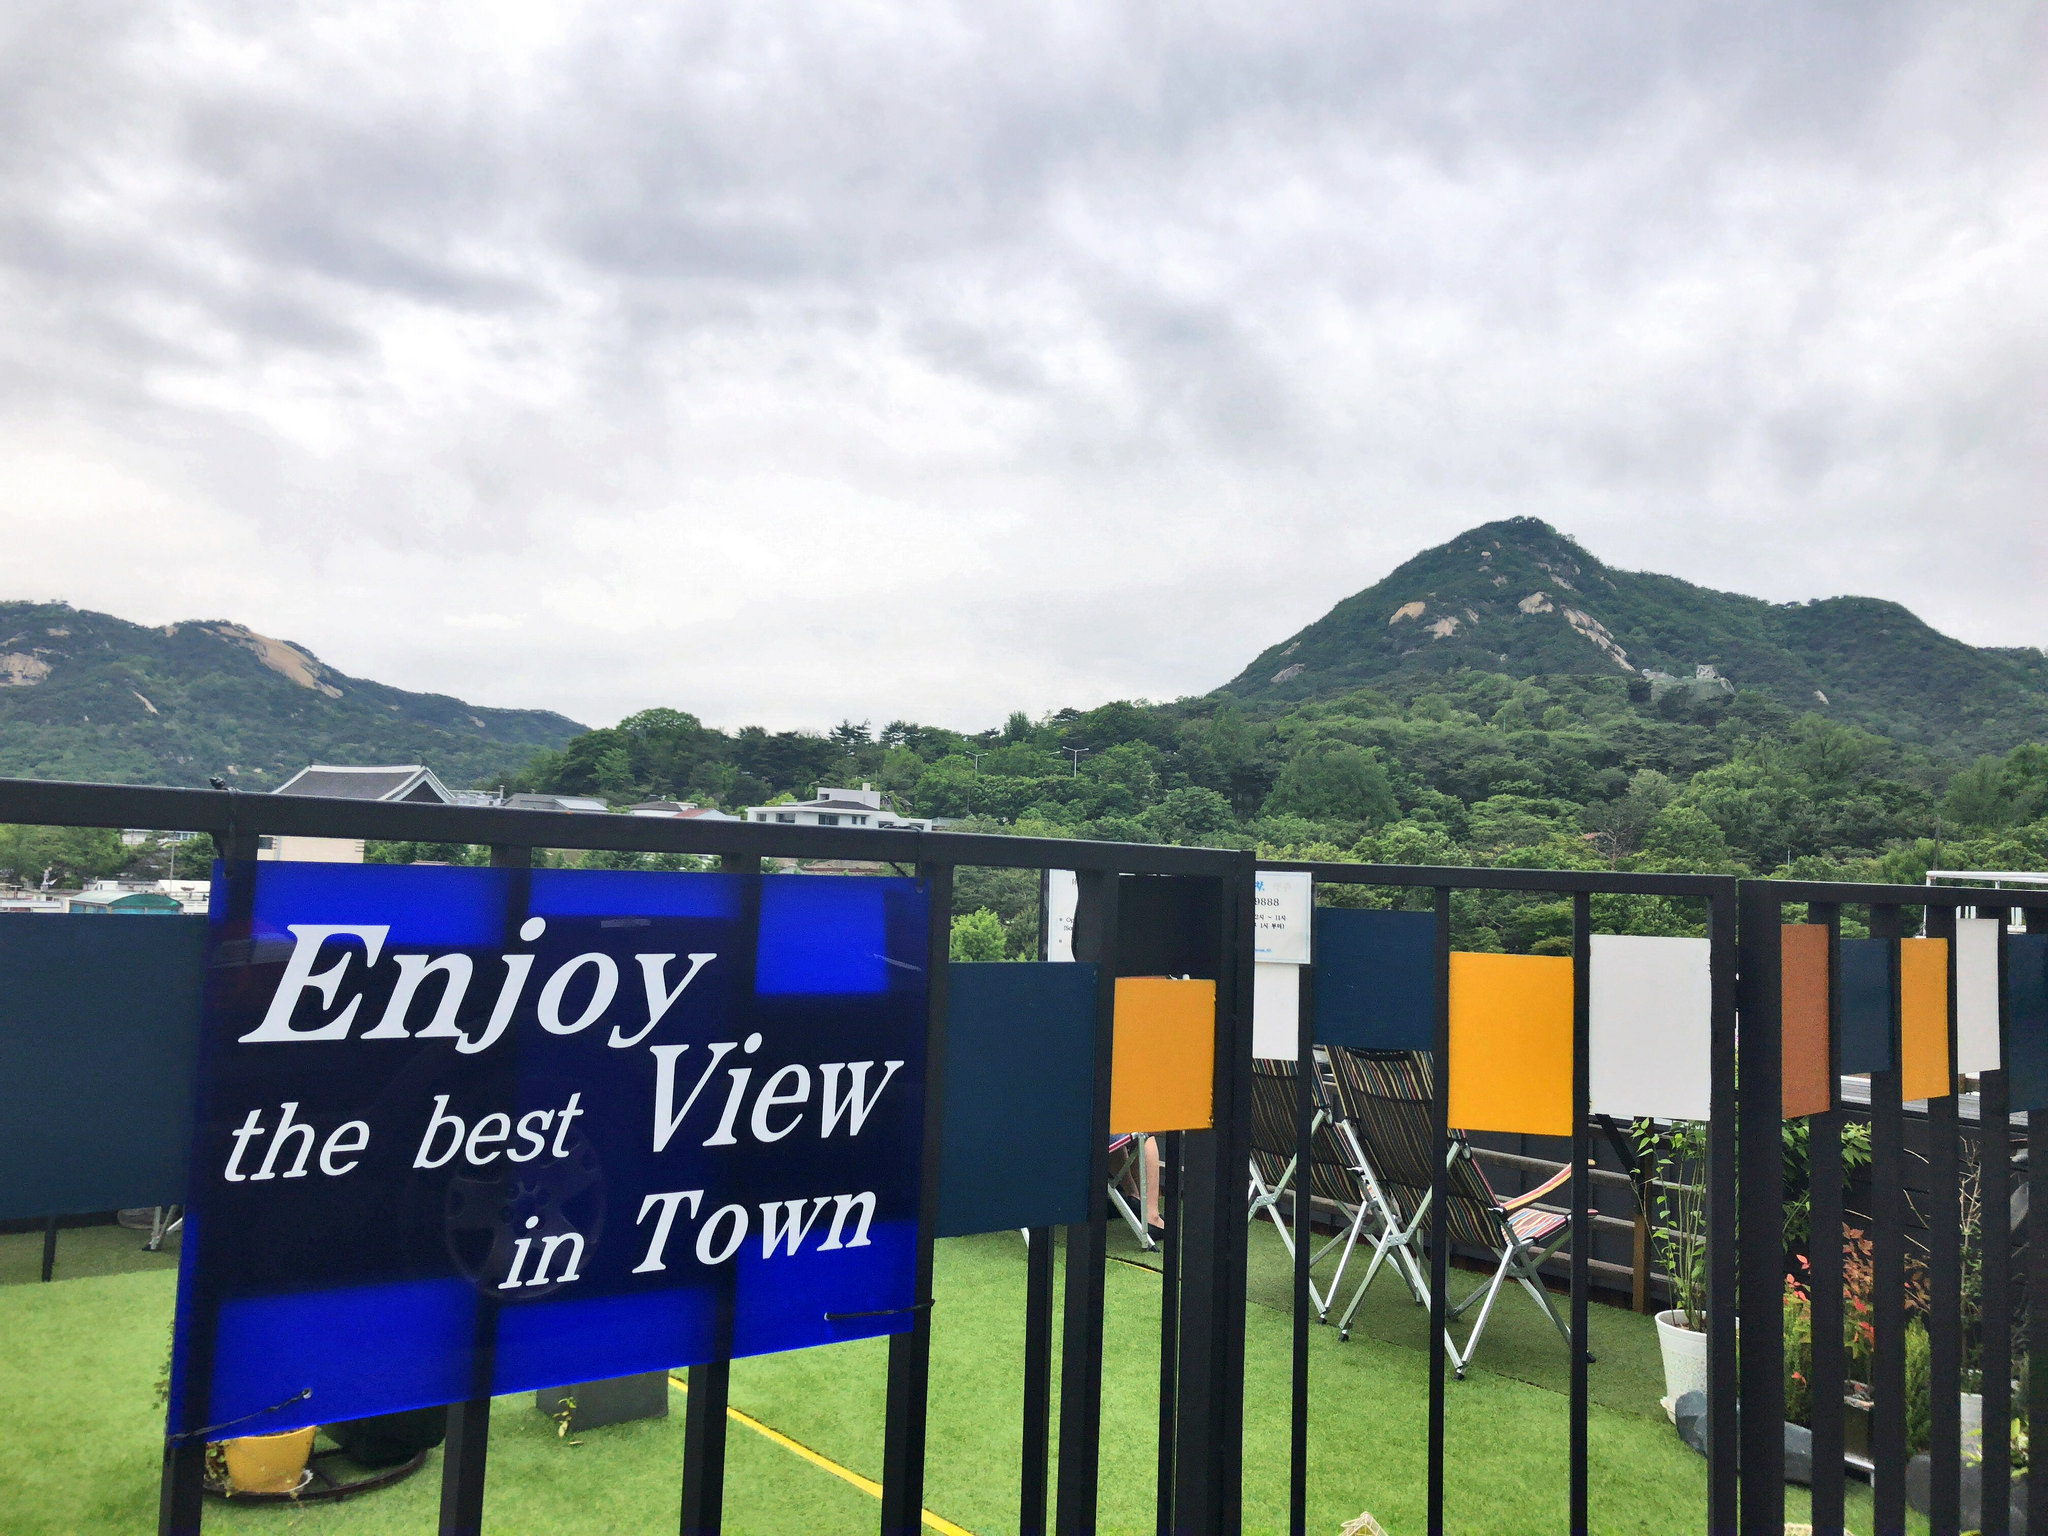 A sign that says 'Enjoy the best View in Town' at Bukchon Hanok Village in Seoul